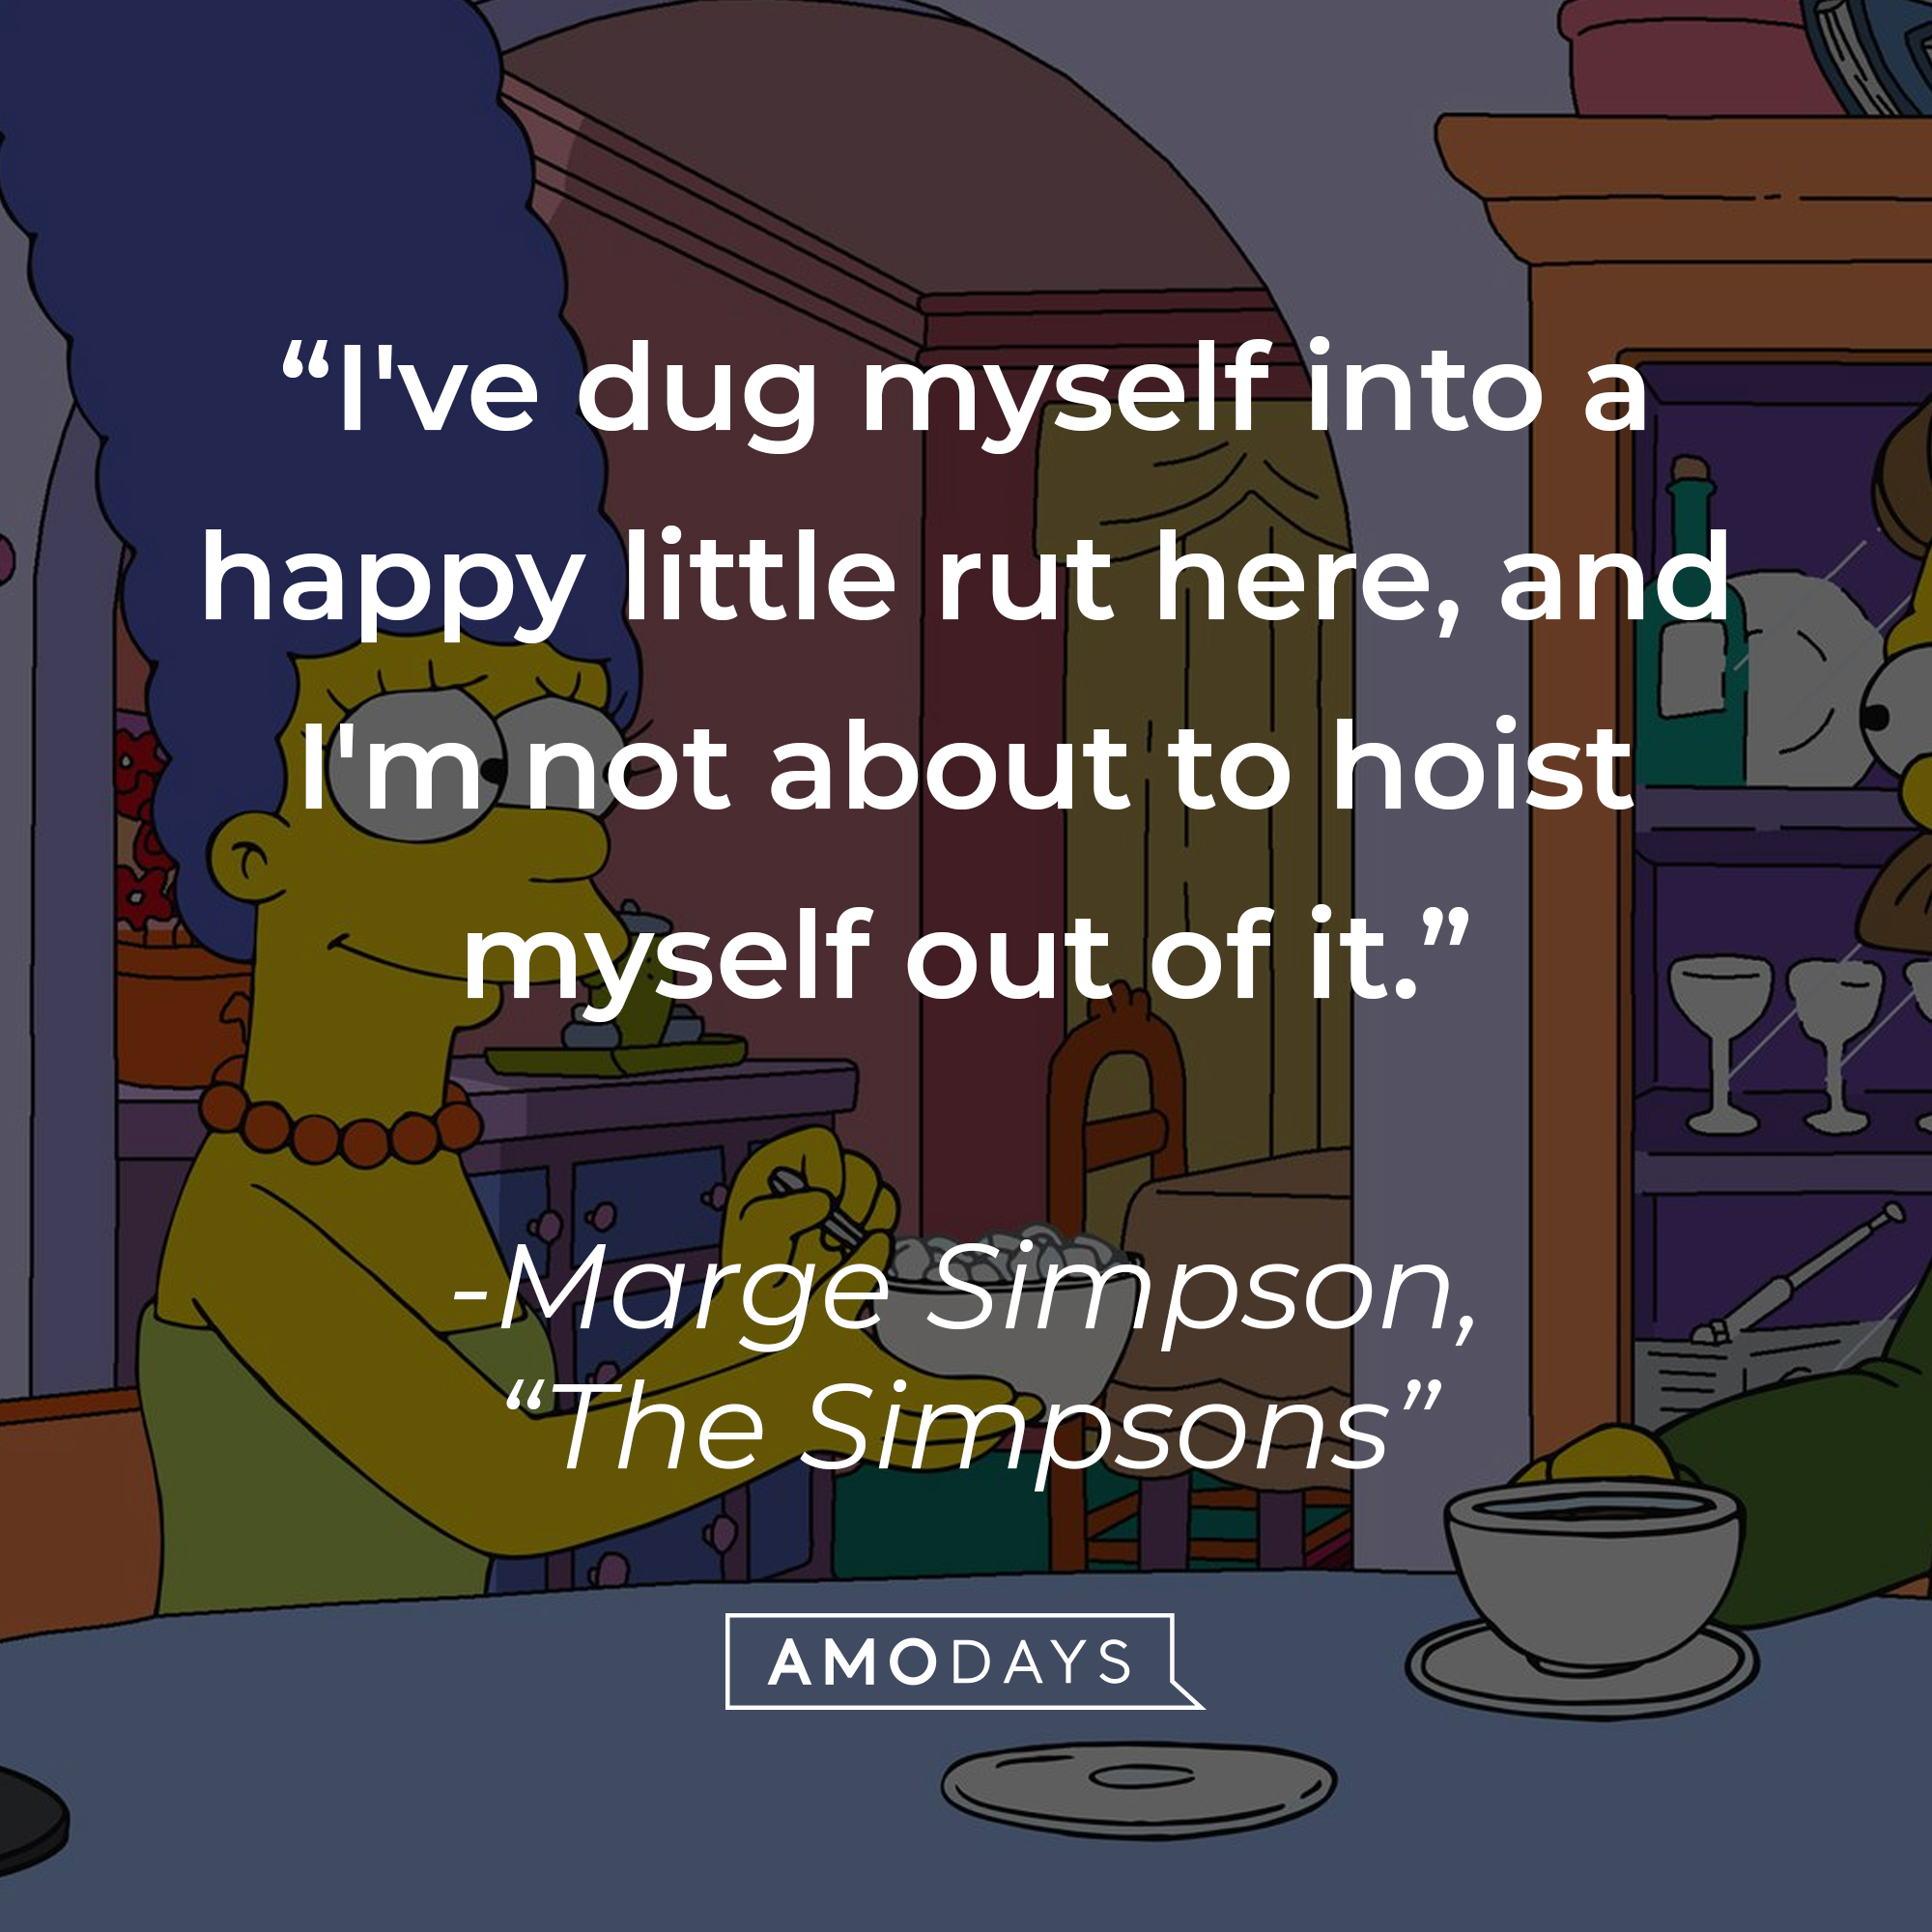 Marge Simpson's quote: "I've dug myself into a happy little rut here, and I'm not about to hoist myself out of it." | Image: facebook.com/TheSimpsons